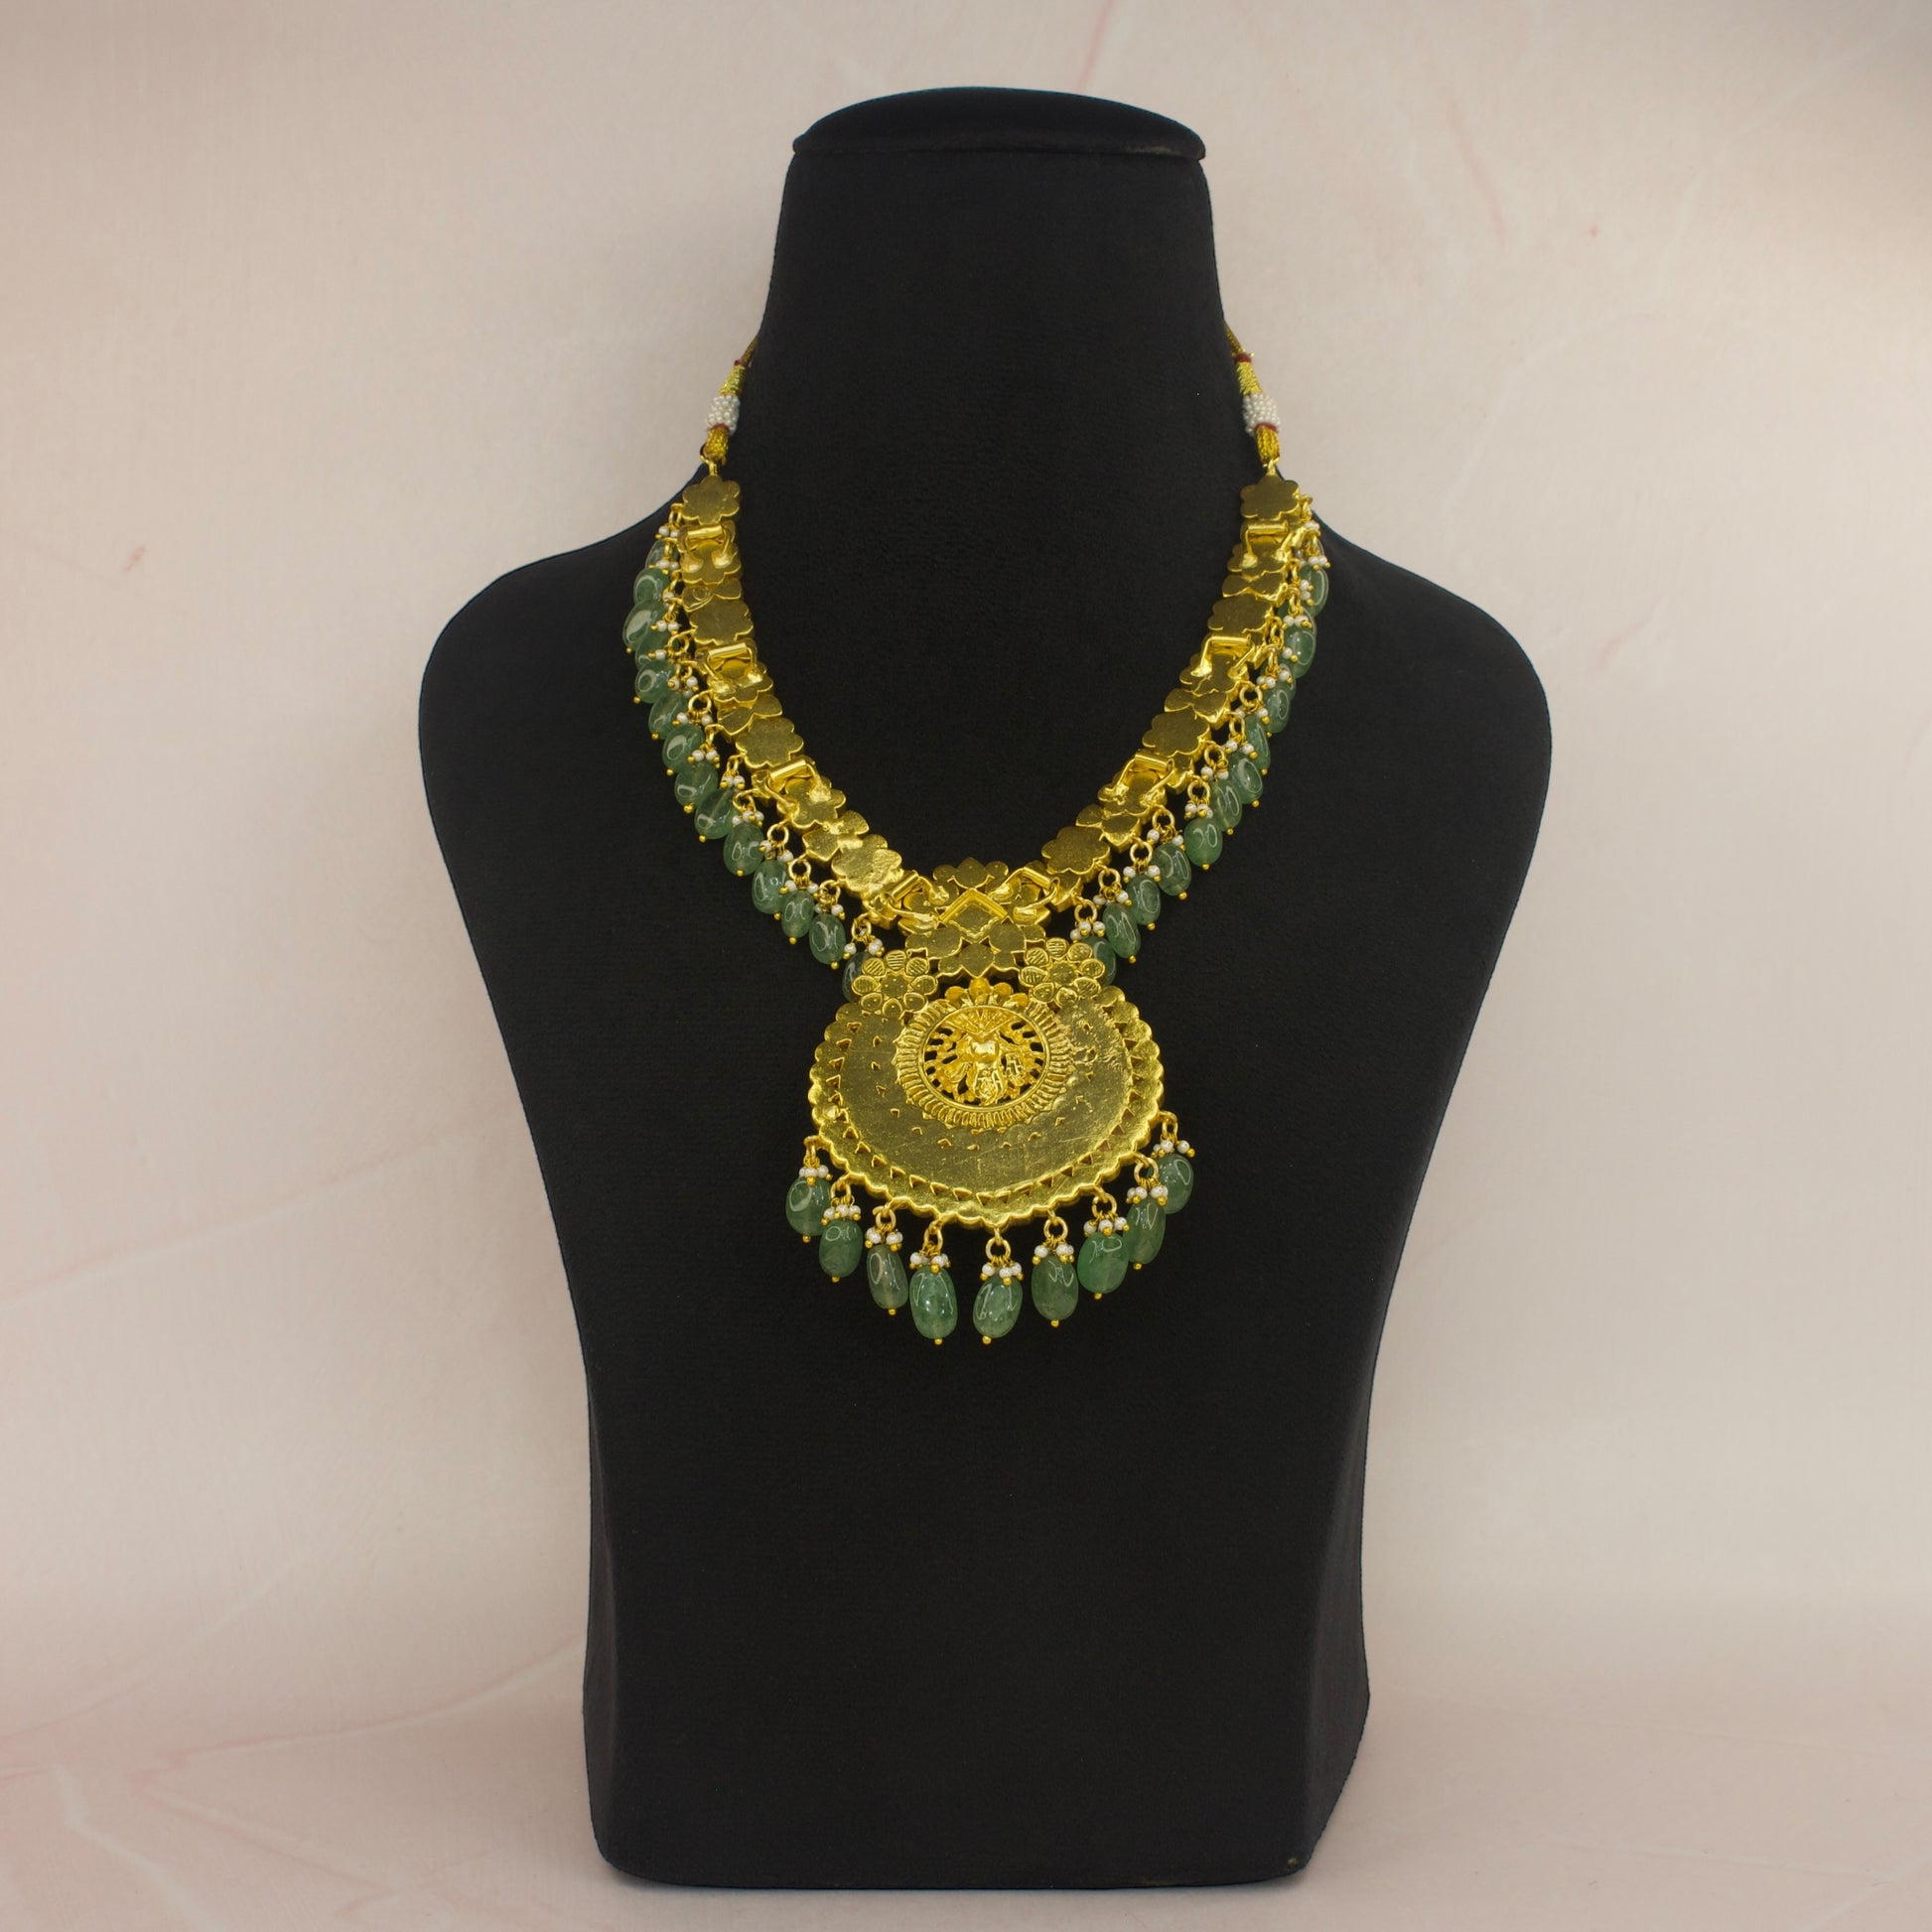 Gold Plated Temple Jadau Kundan Necklace with Green Beads with 22k gold plating. This Product belongs to Jadau Kundan jewellery Category